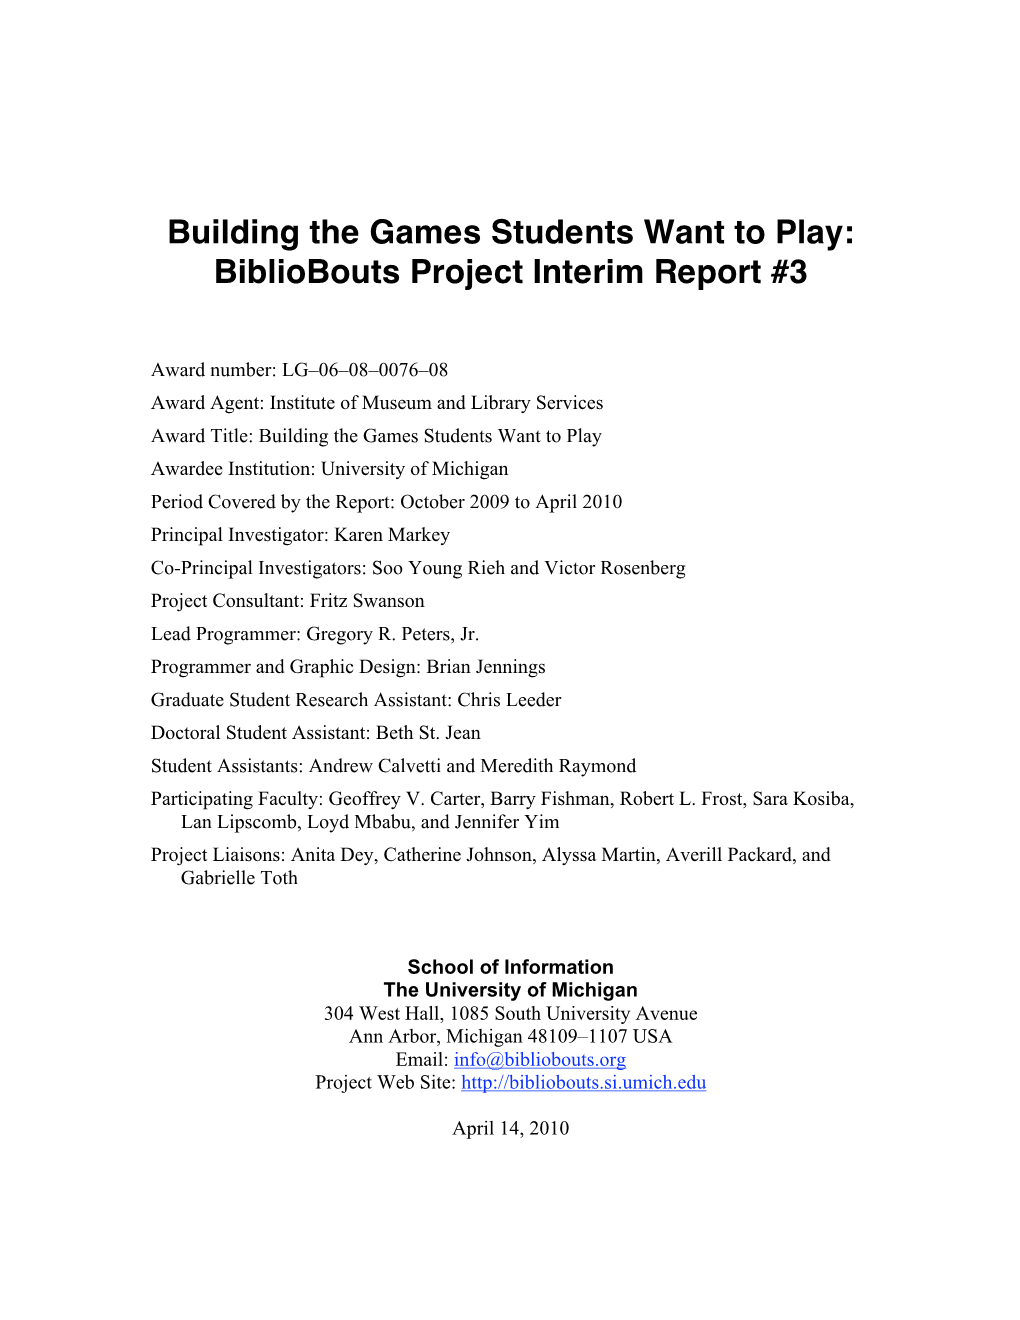 Building the Games Students Want to Play: Bibliobouts Project Interim Report #3